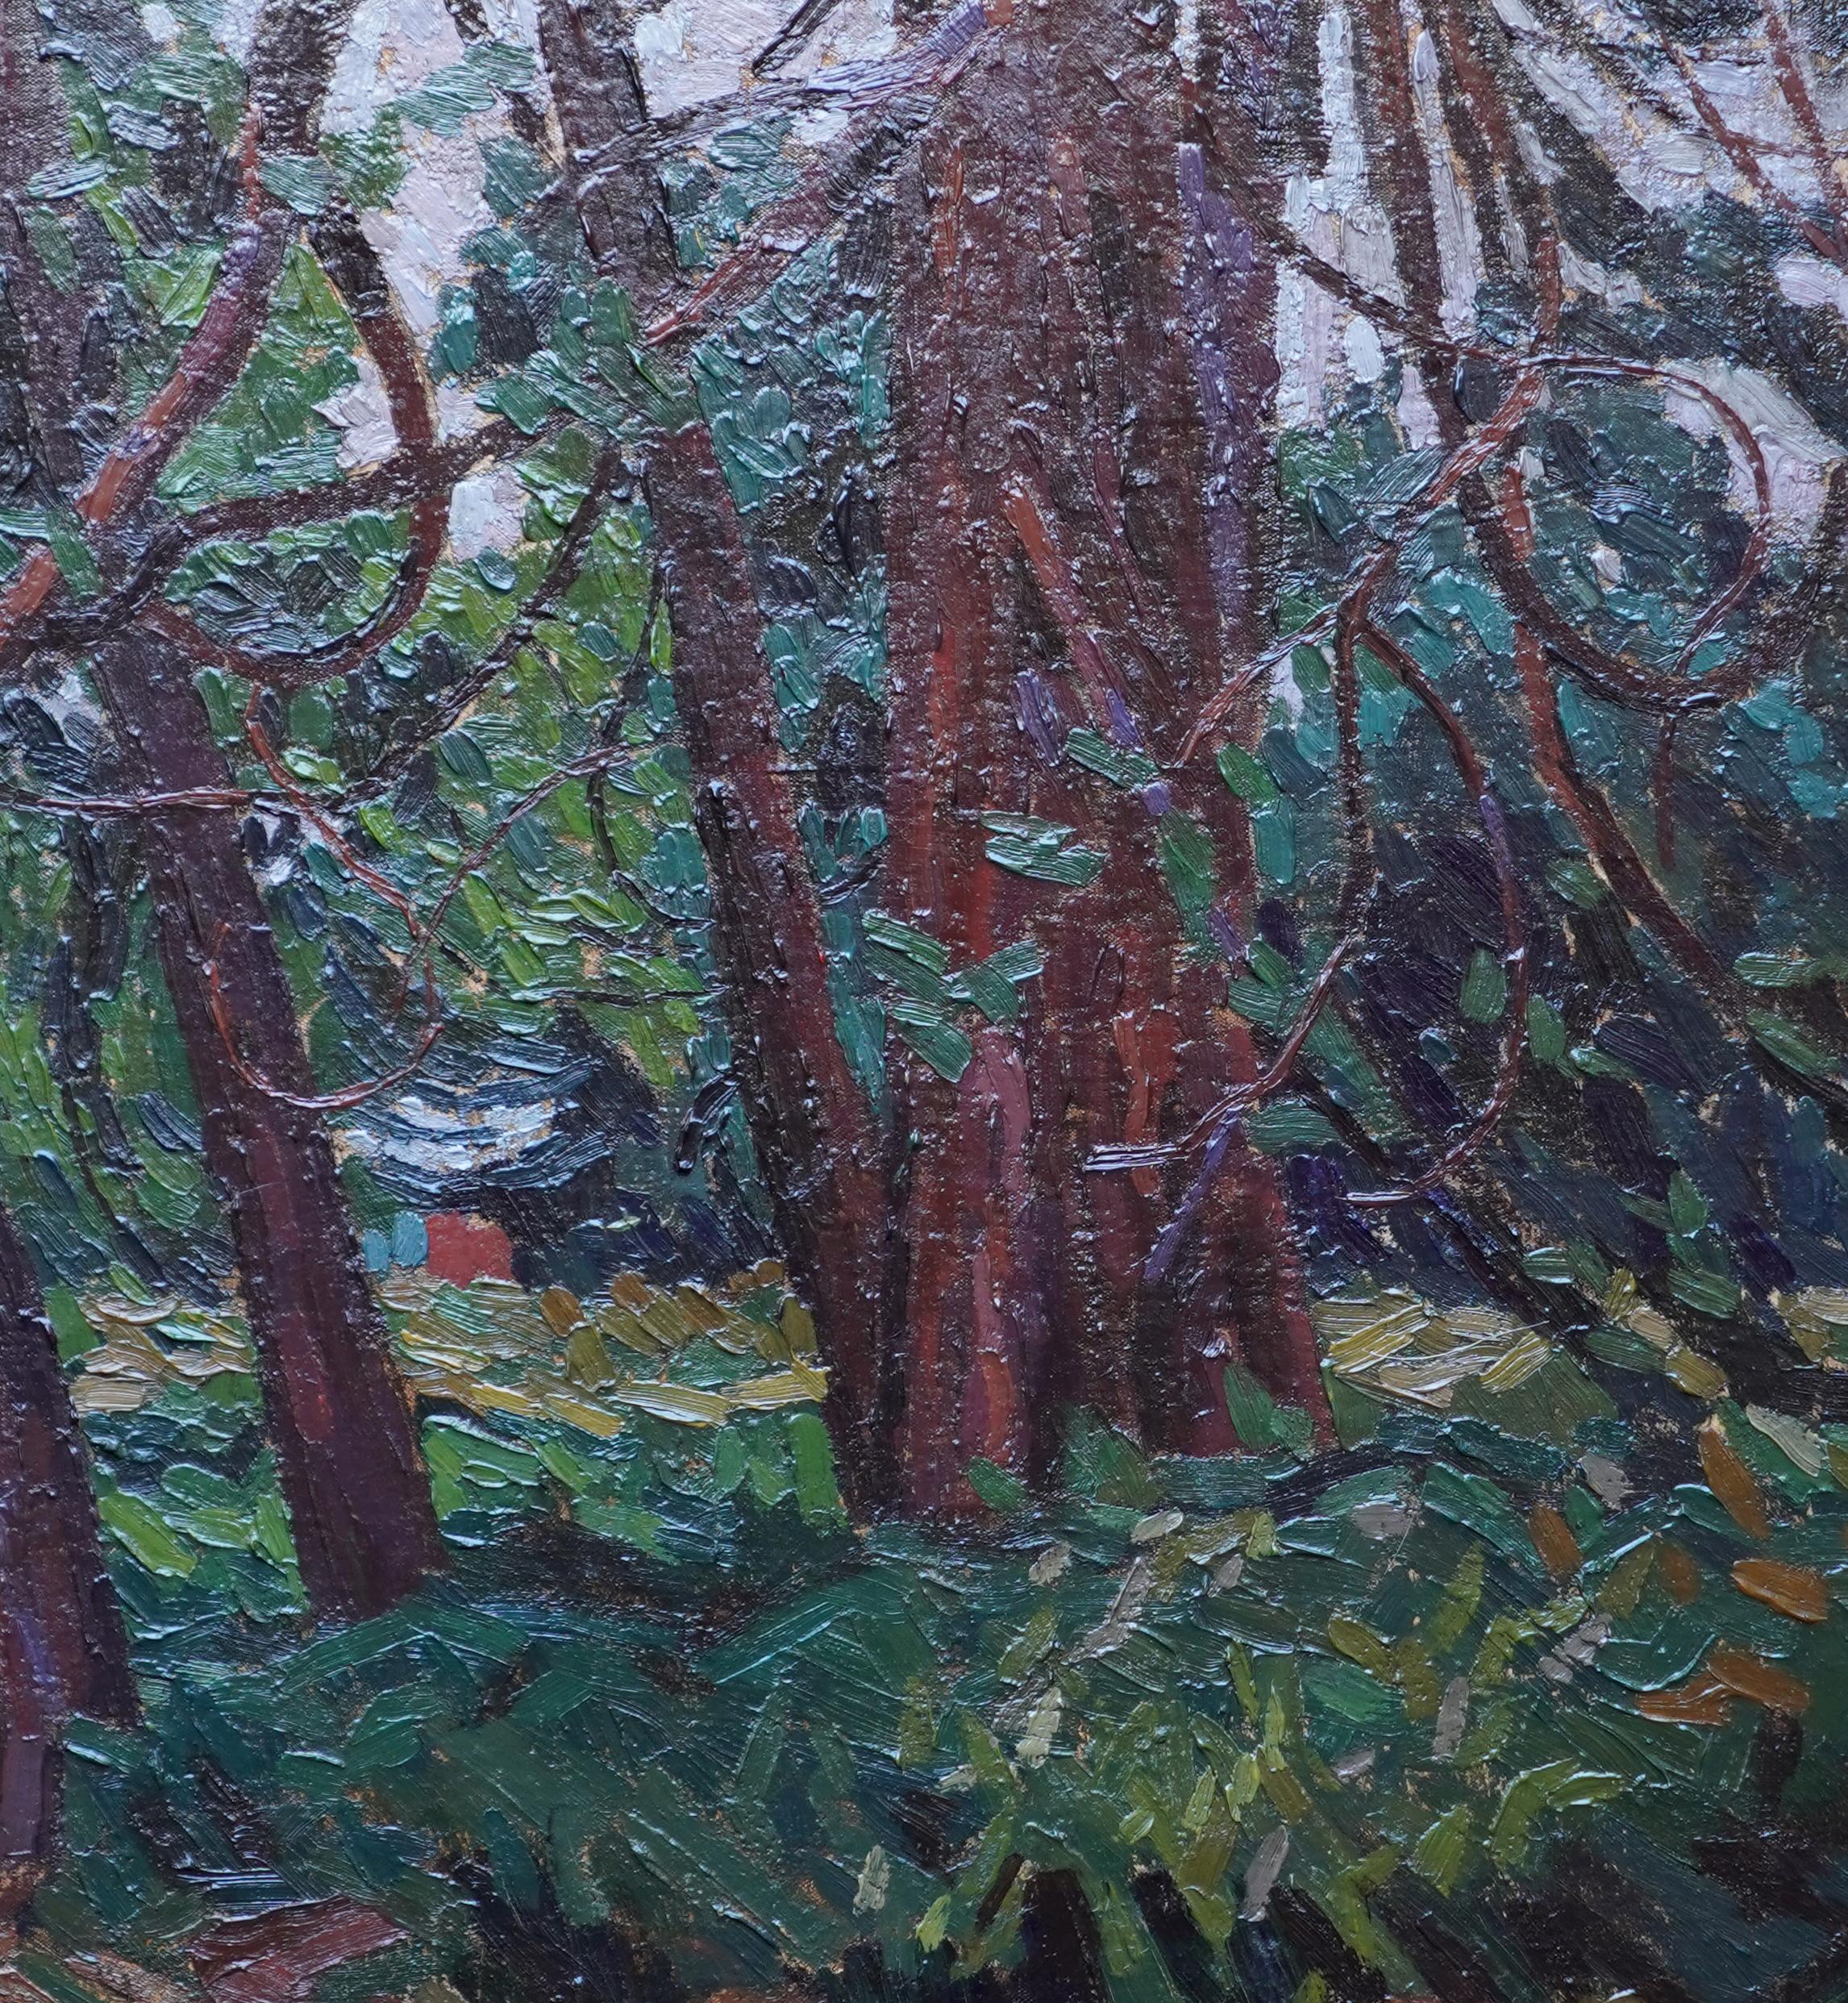 View Through Trees - British Post Impressionist 50's art landscape oil painting - Post-Impressionist Painting by Peter L. Field